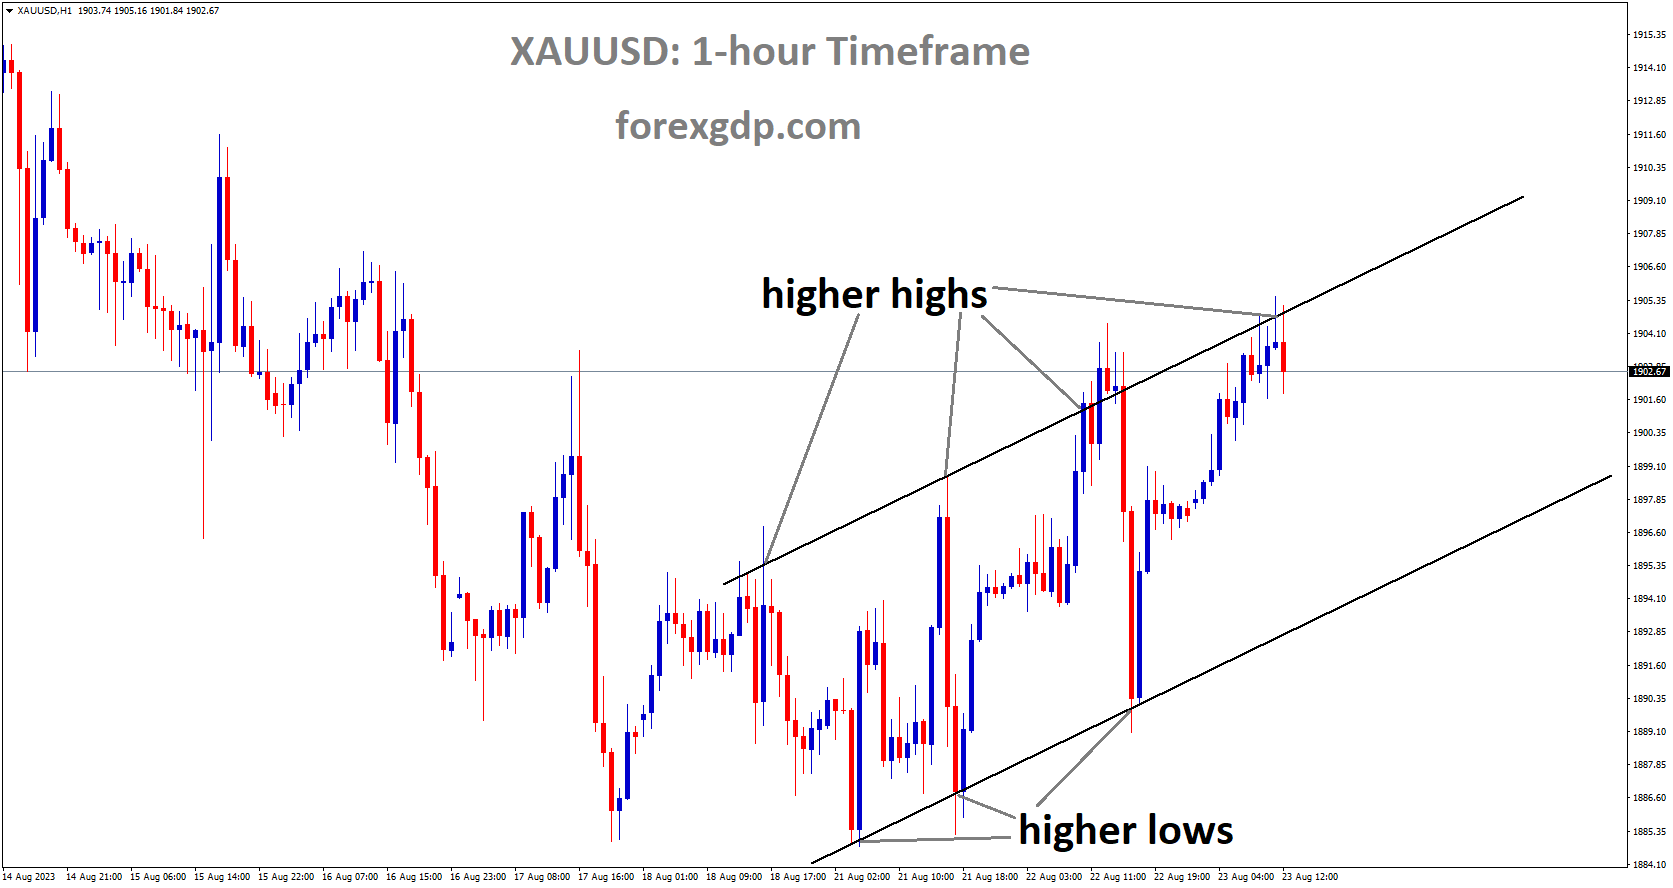 XAUUSD is moving in Ascending channel and market has reached higher high area of the channel